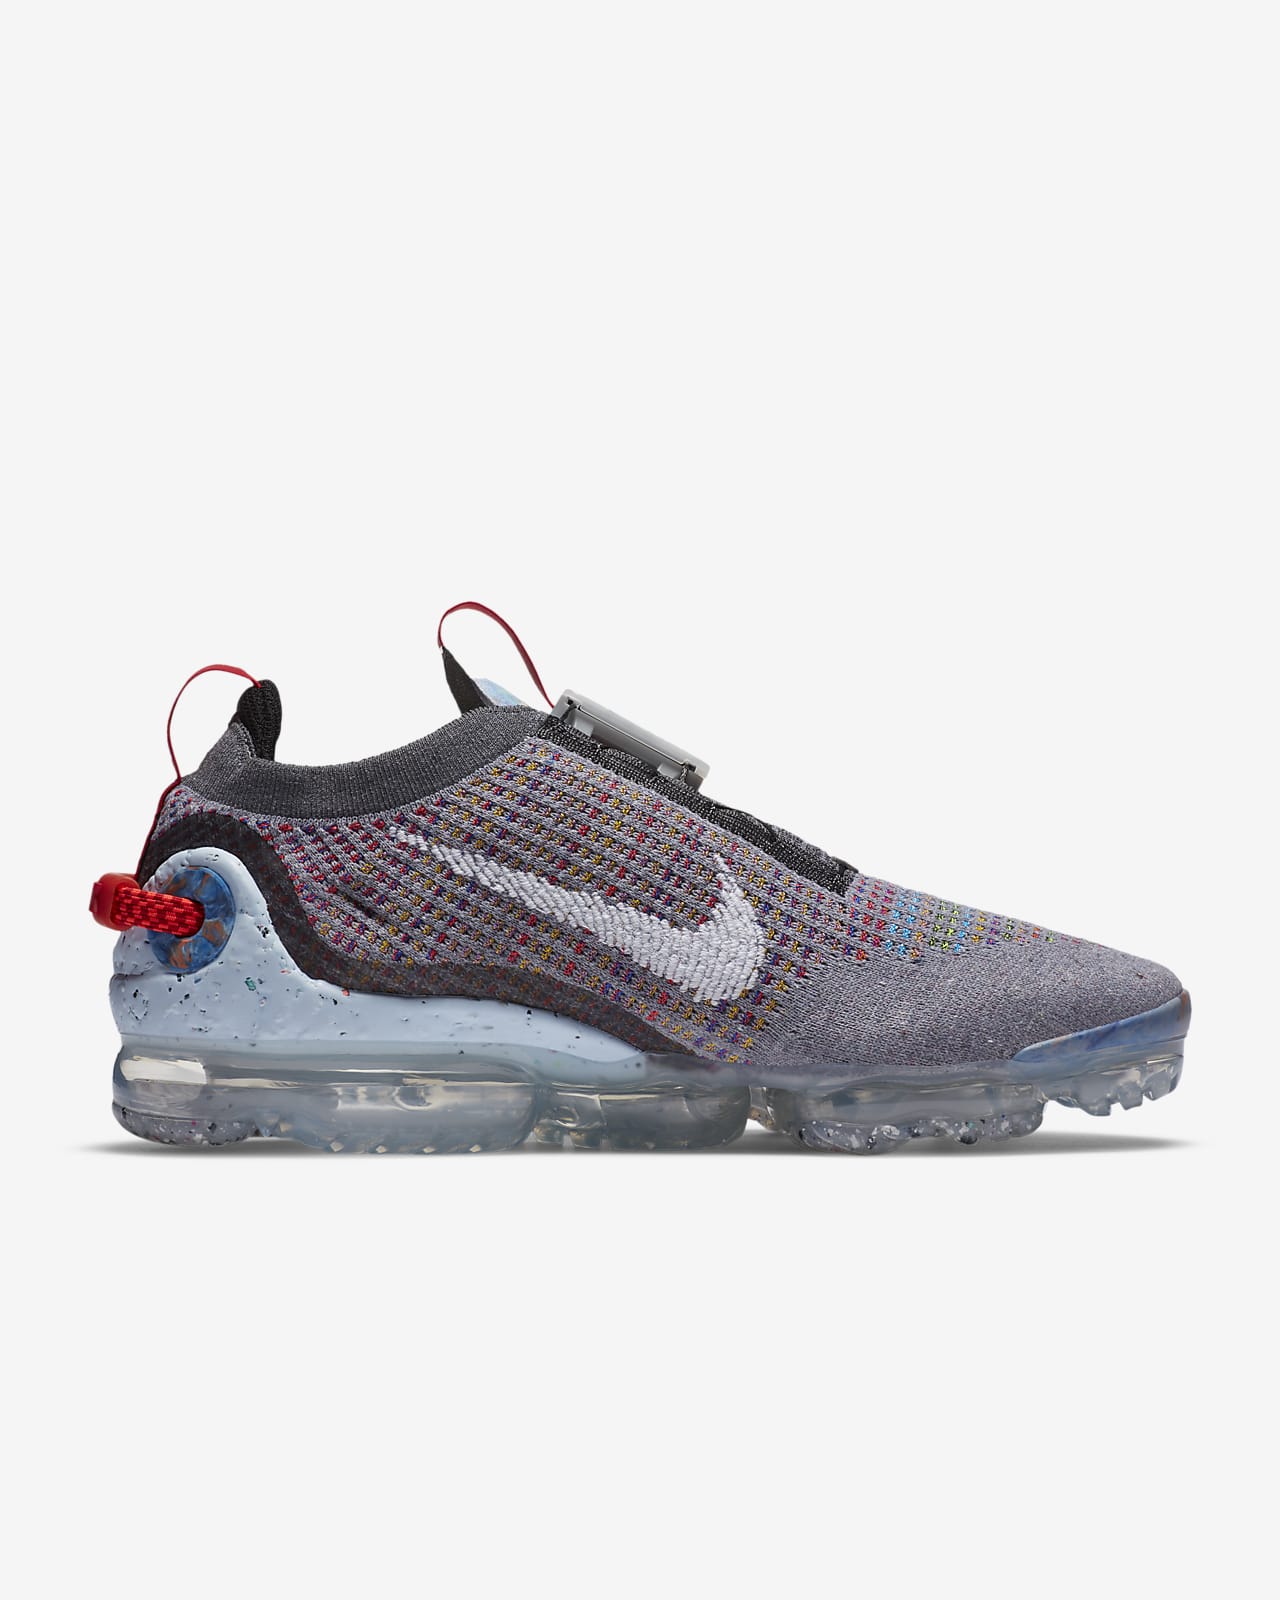 Nike Vapormax Plus Chicago CW6974 100 in 2020 Red and